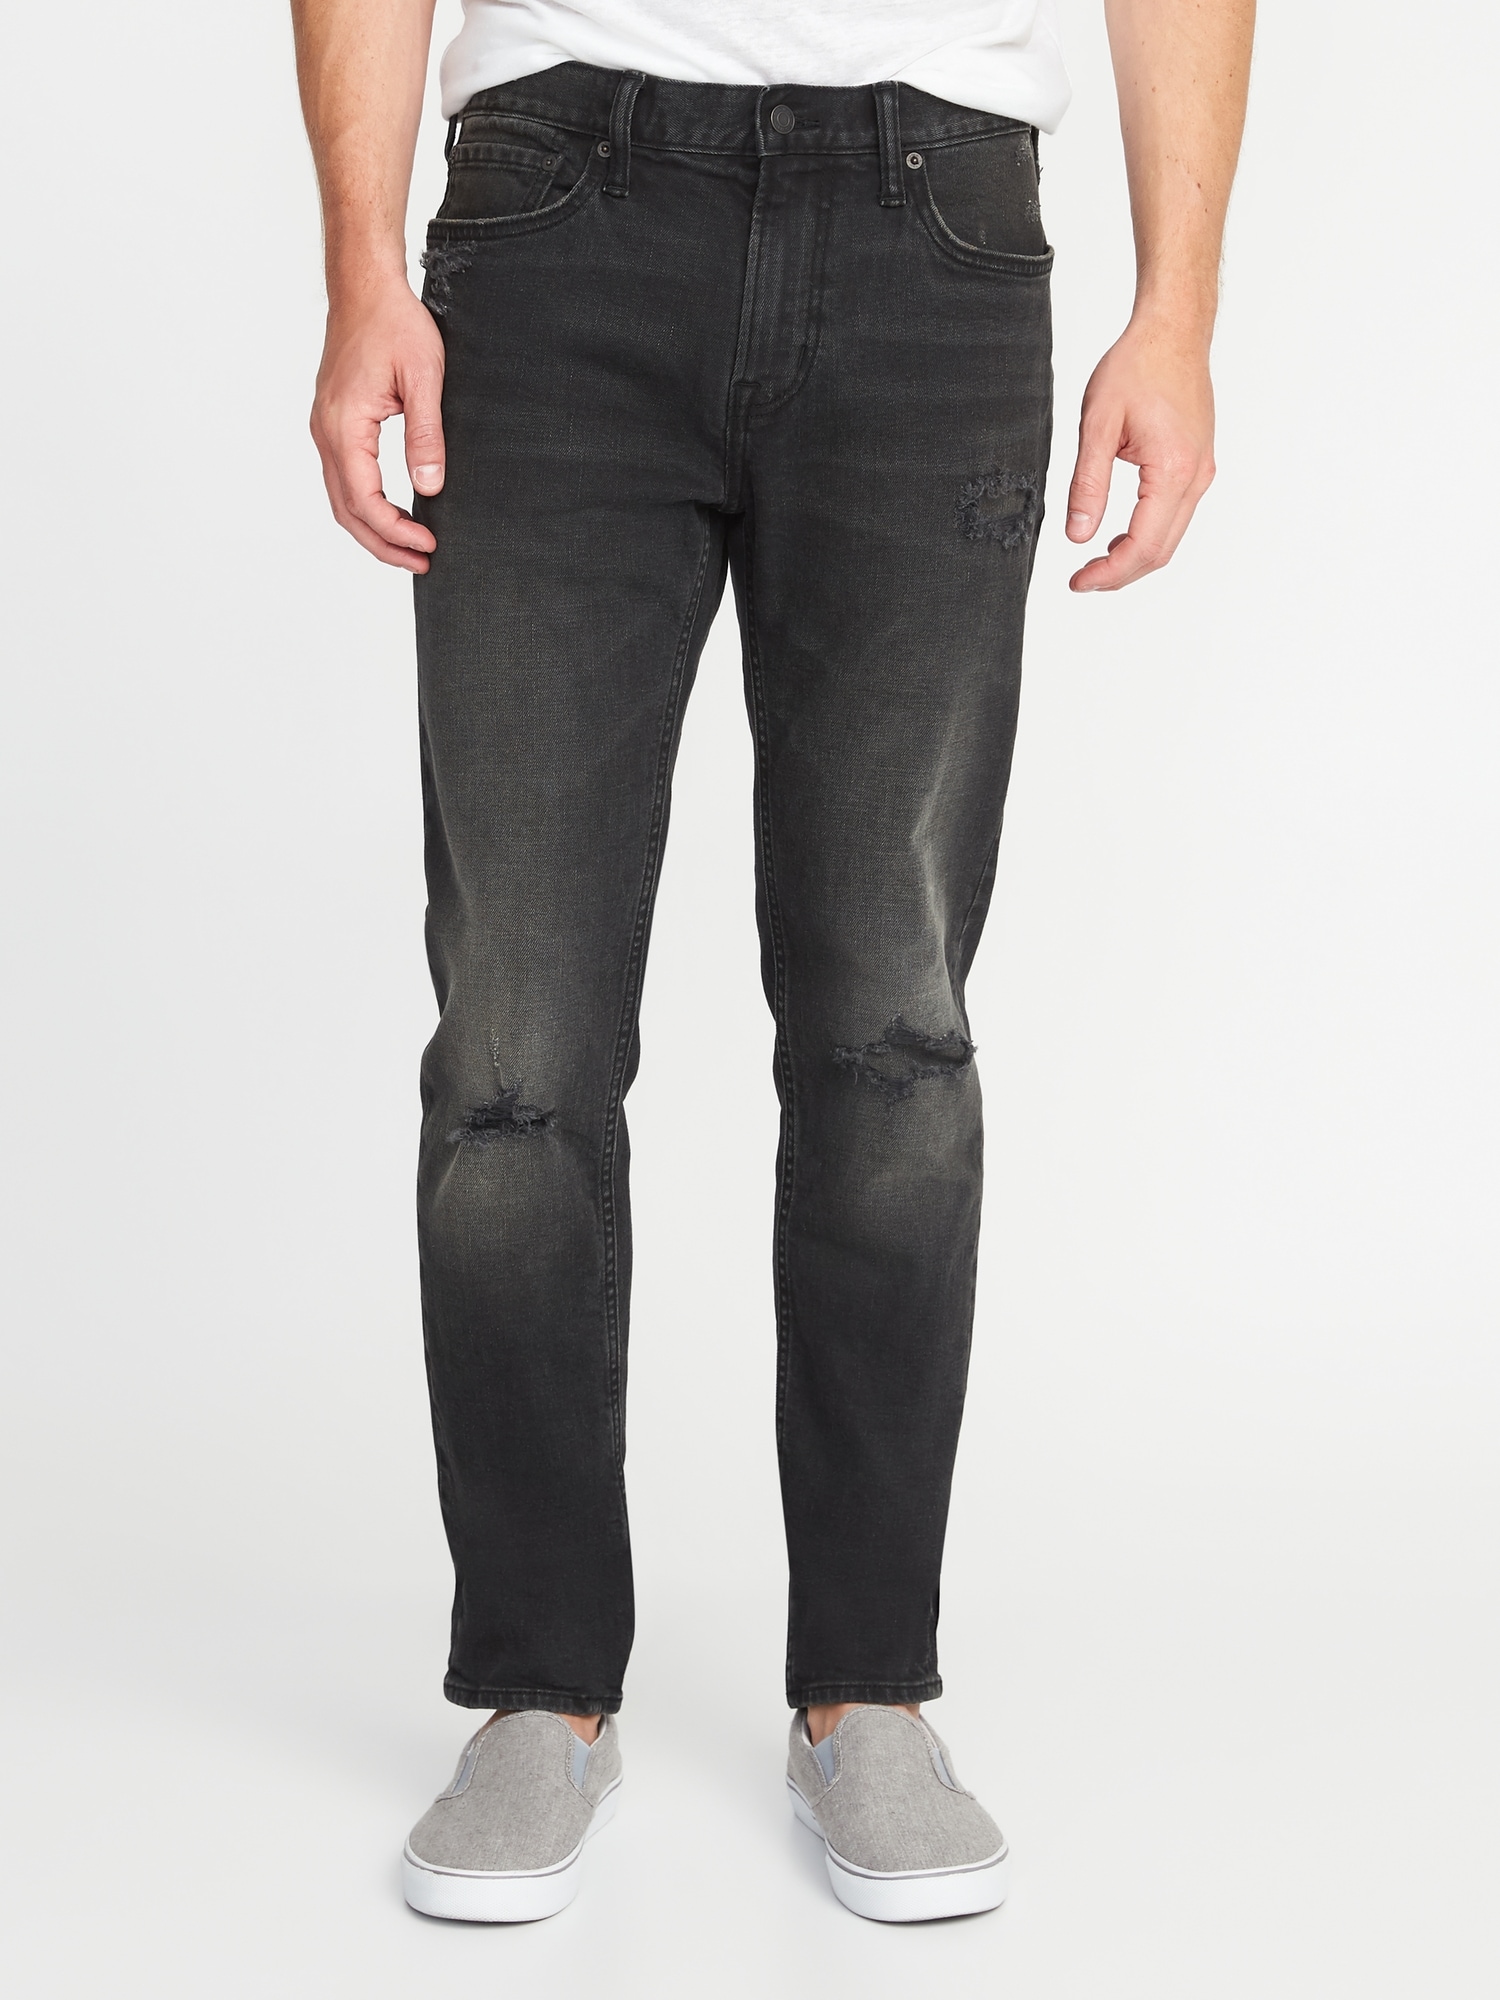 Relaxed Slim Built In Flex Distressed Black Jeans For Men Old Navy